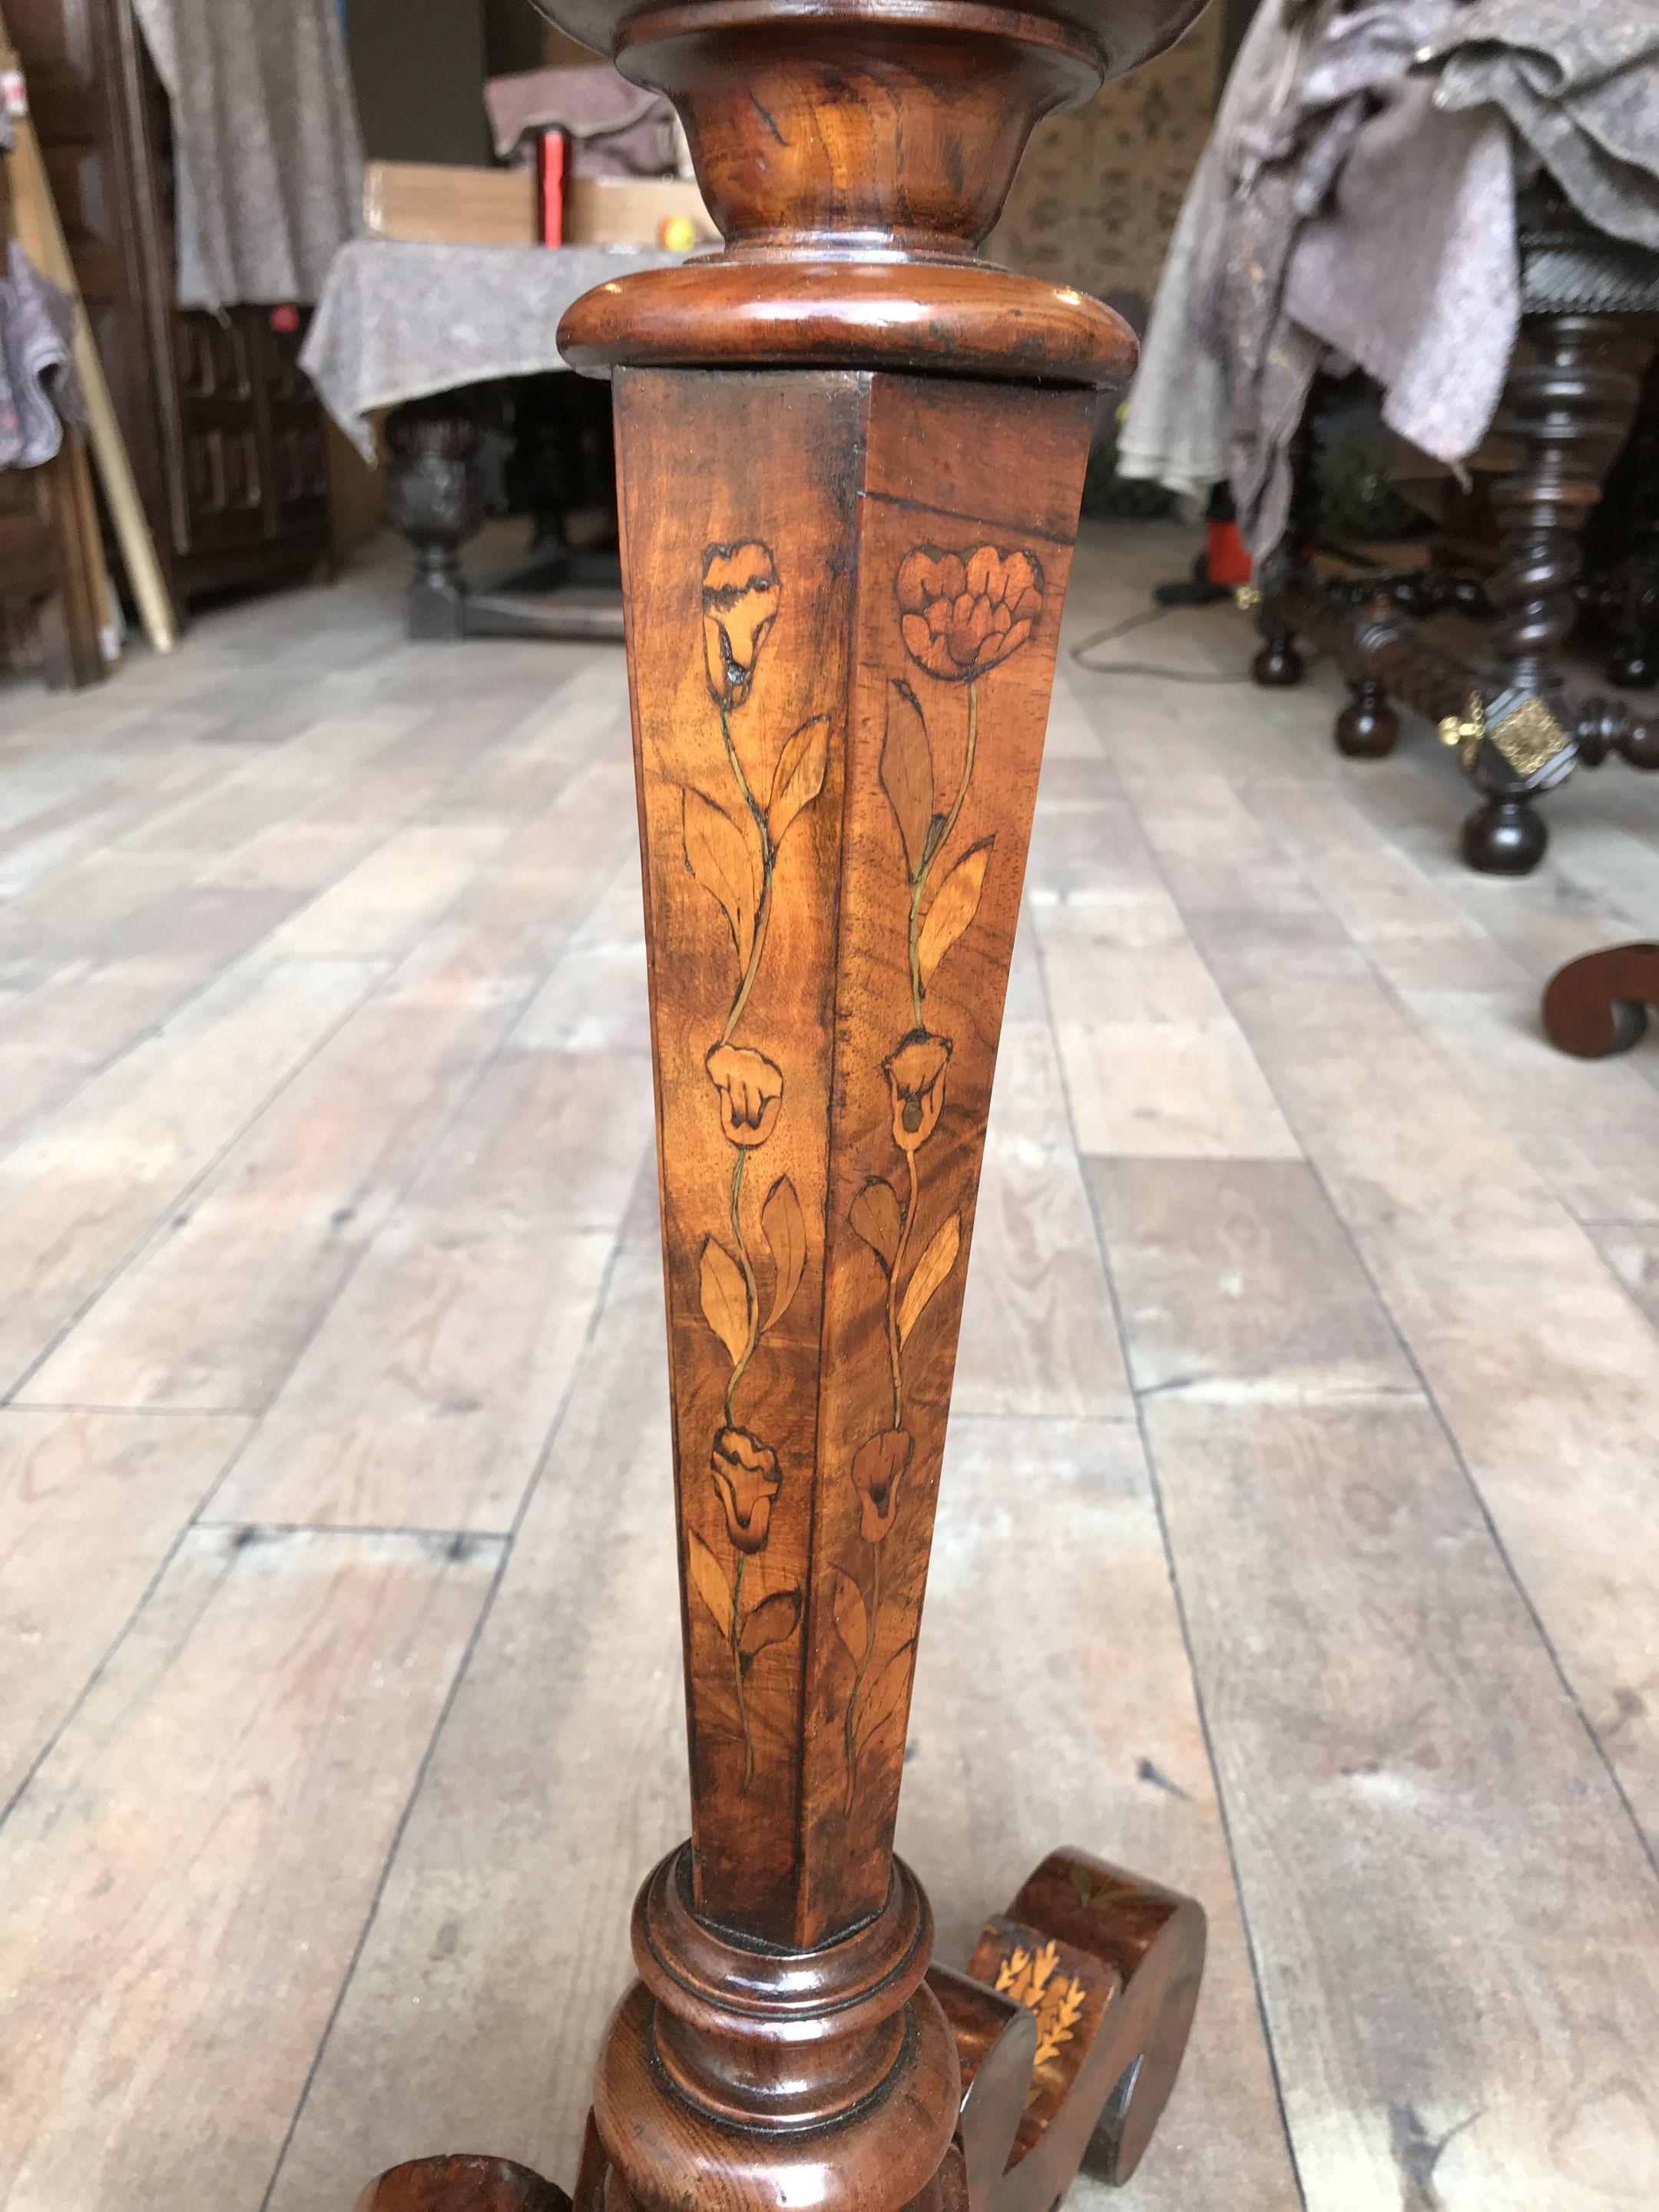 Due to their utilitarian nature, surviving pairs of 17th century candle stands/torchères are extremely rare and generally only seen today in great houses. The quality of the marquetry decoration and the attention to detail indicate that these candle